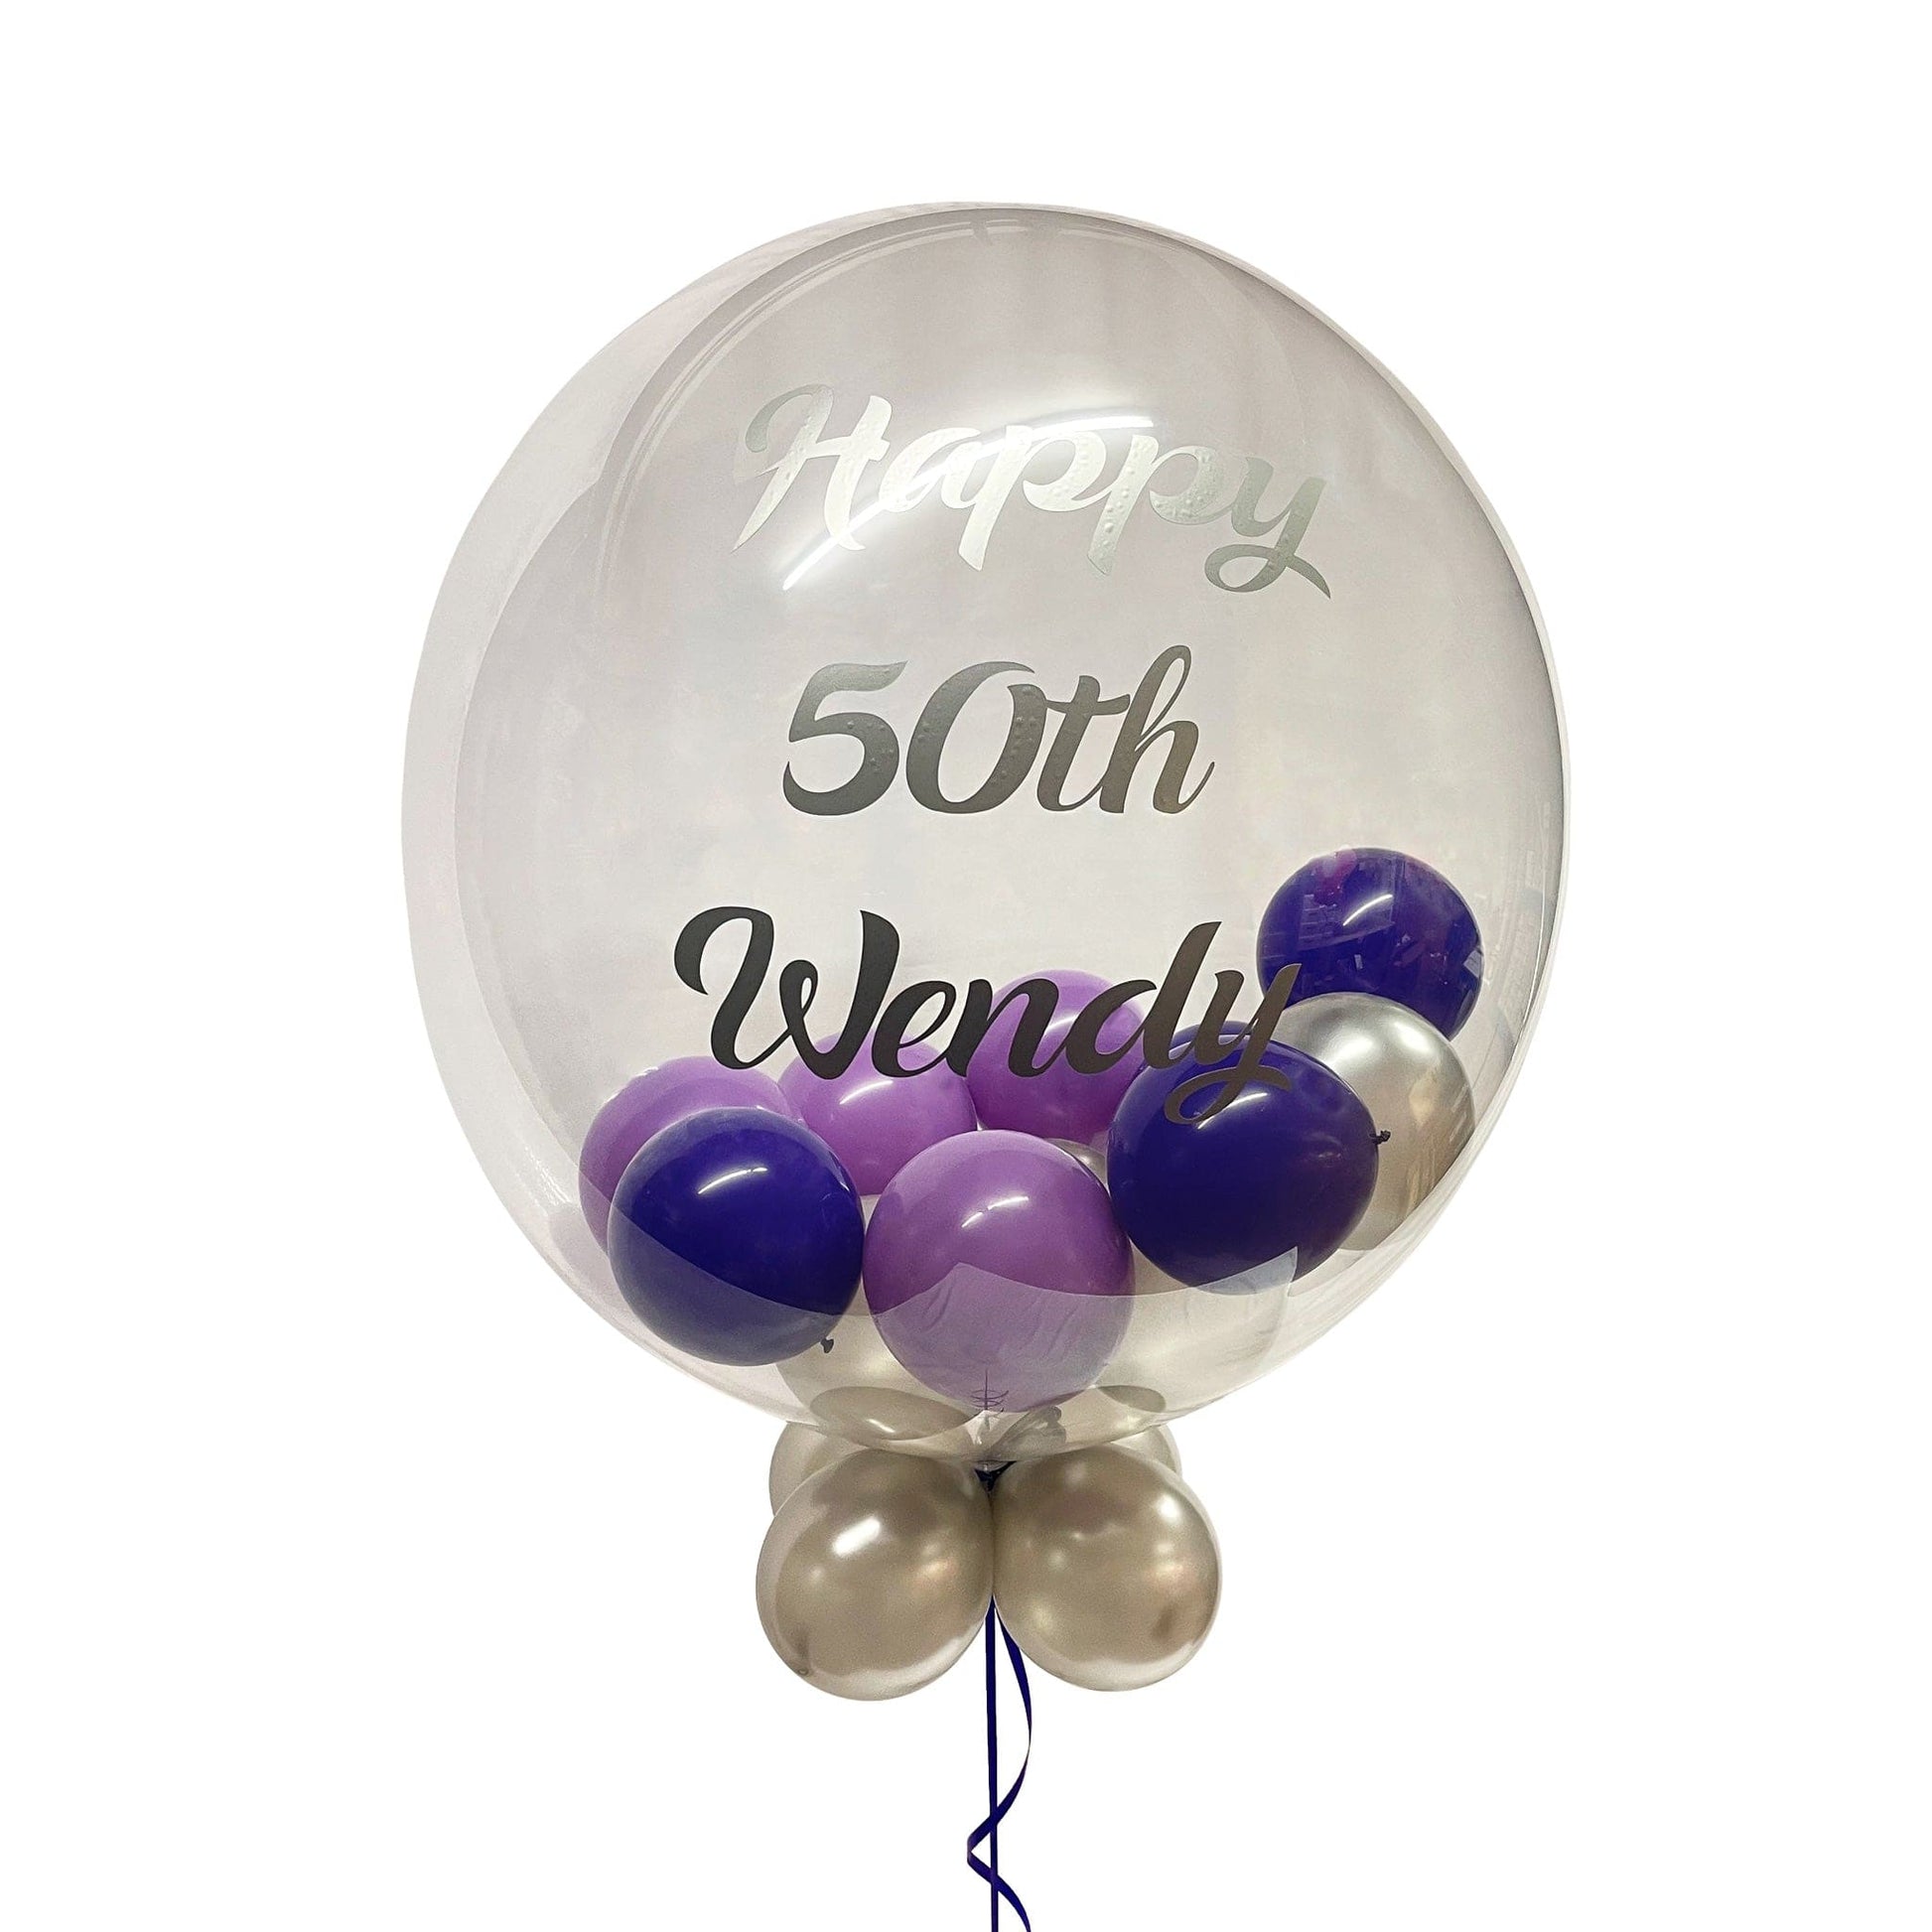 Castle Balloons Balloons Lavender Bubble with Vinyl Writing